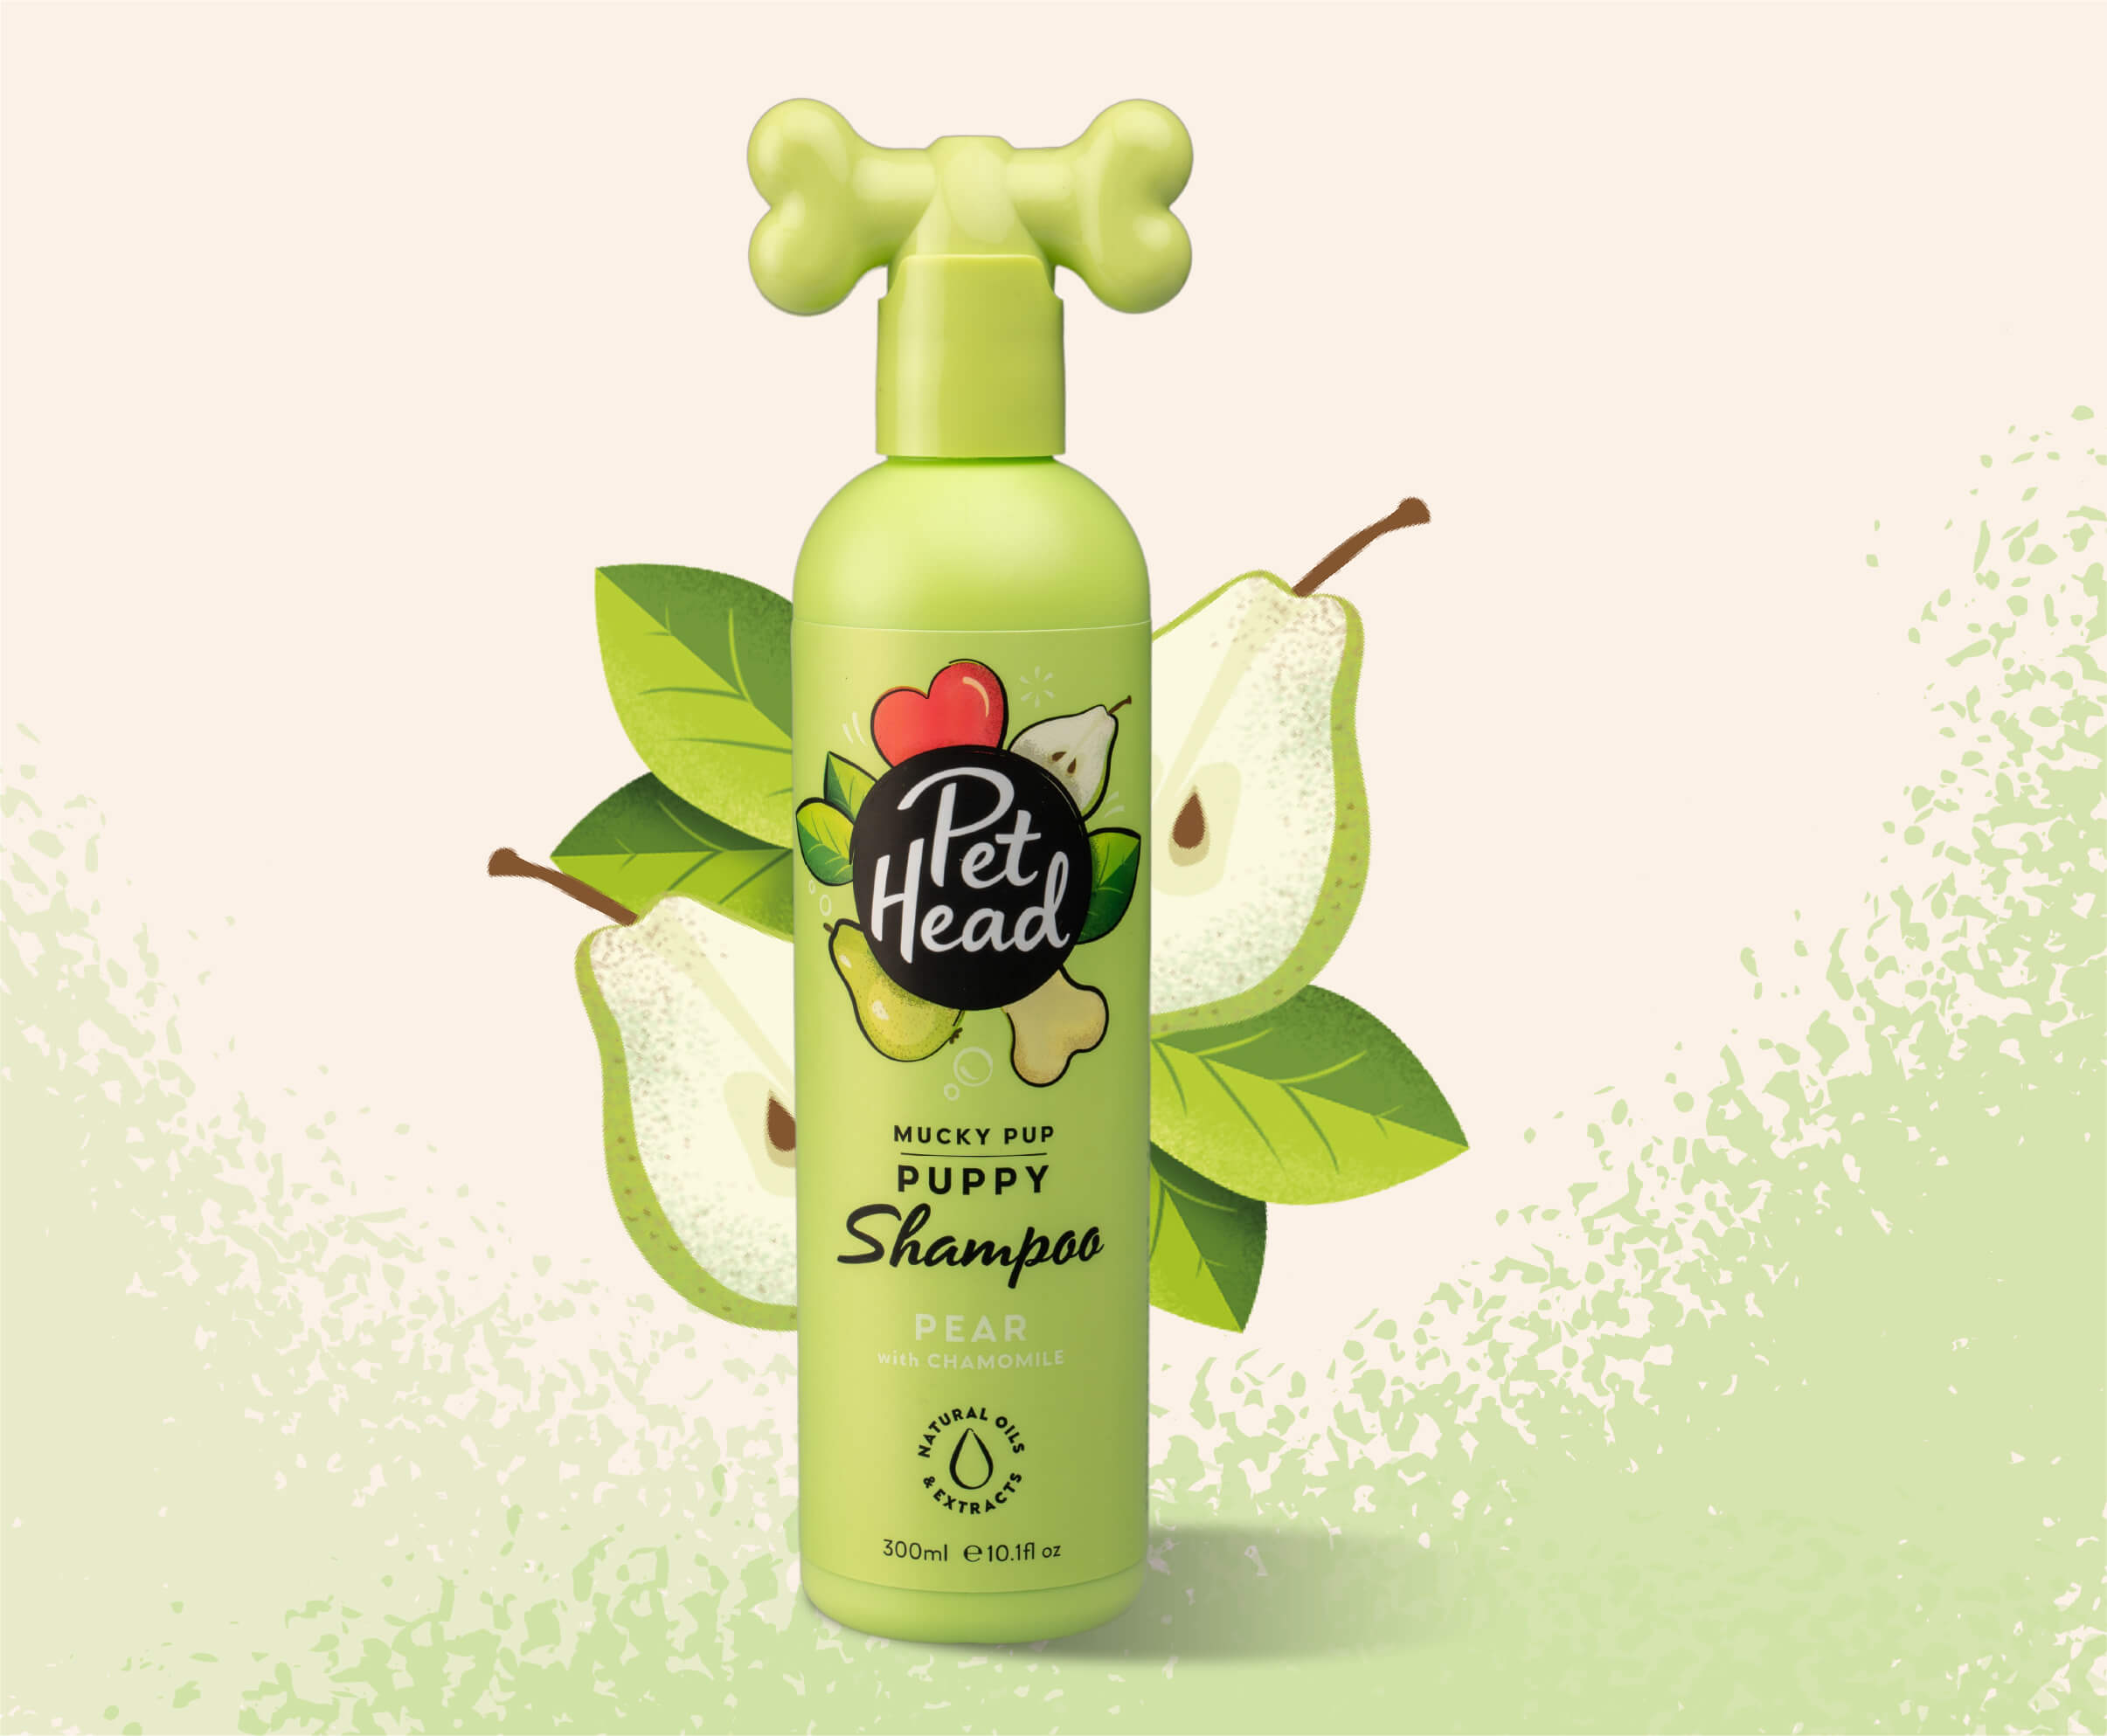 Product shot of the bck of the Pet Head Mucky Pup shampoo